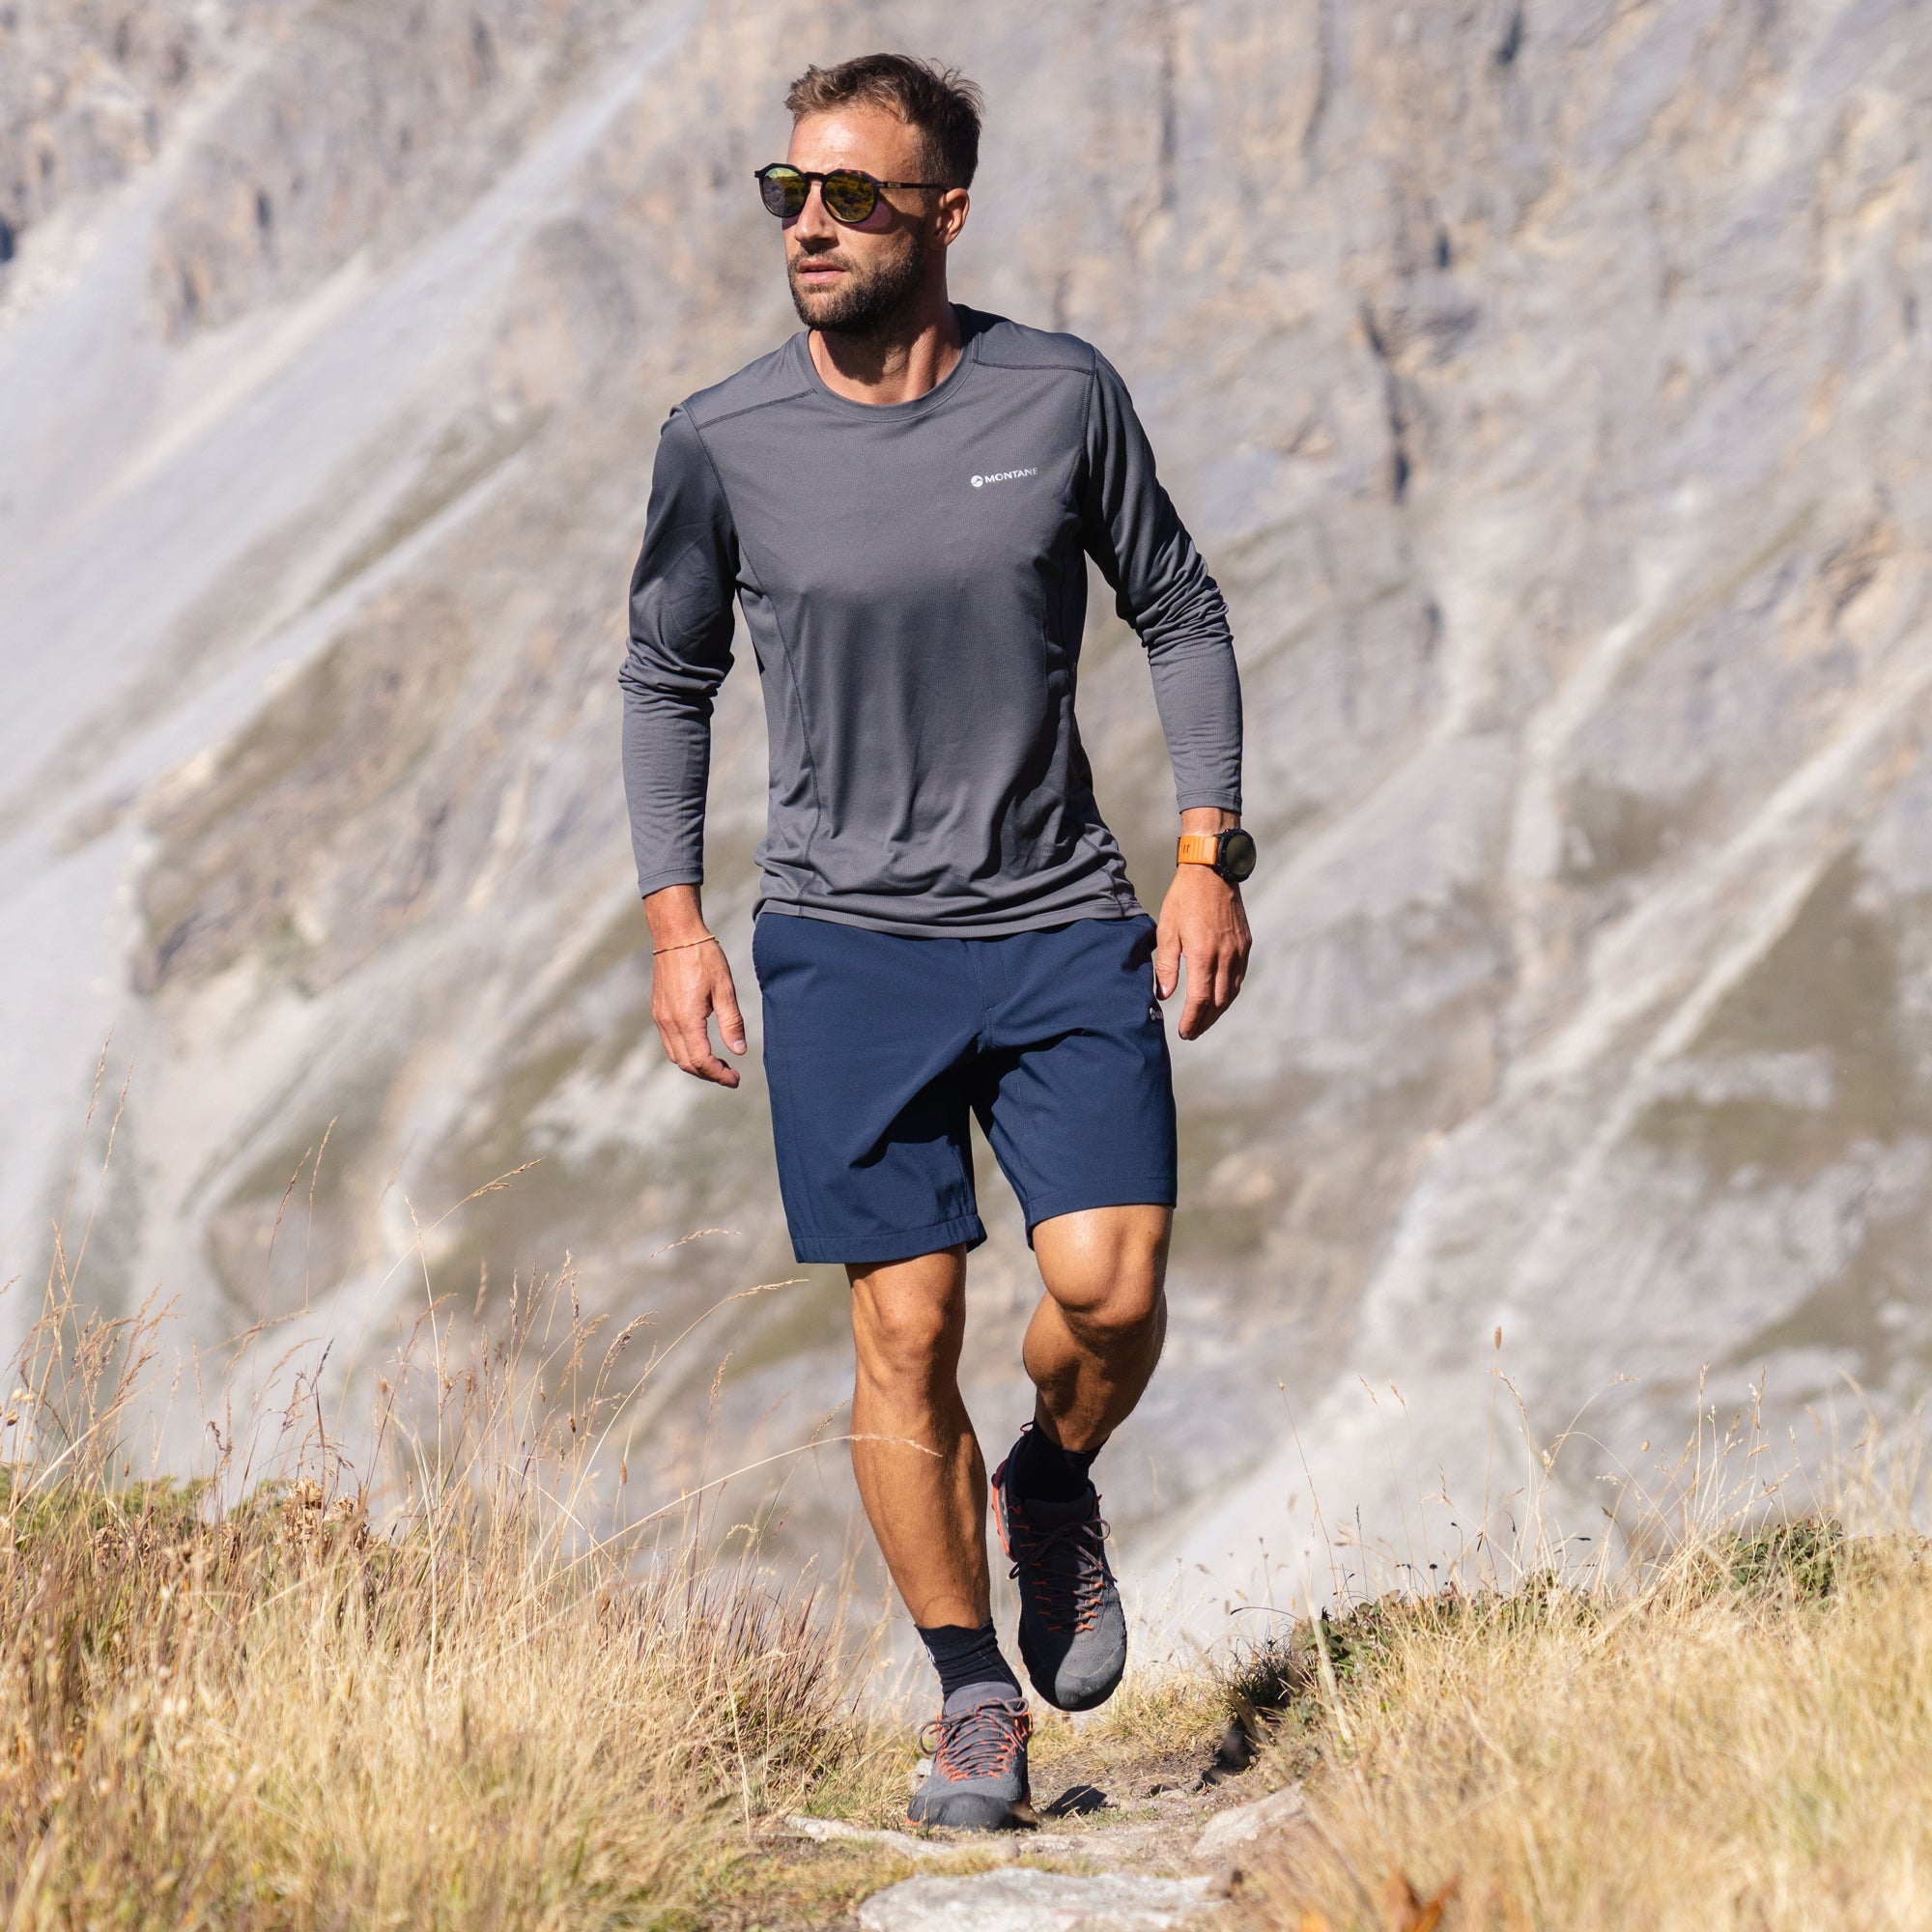 Men's Shorts for Running, Hiking and Climbing.